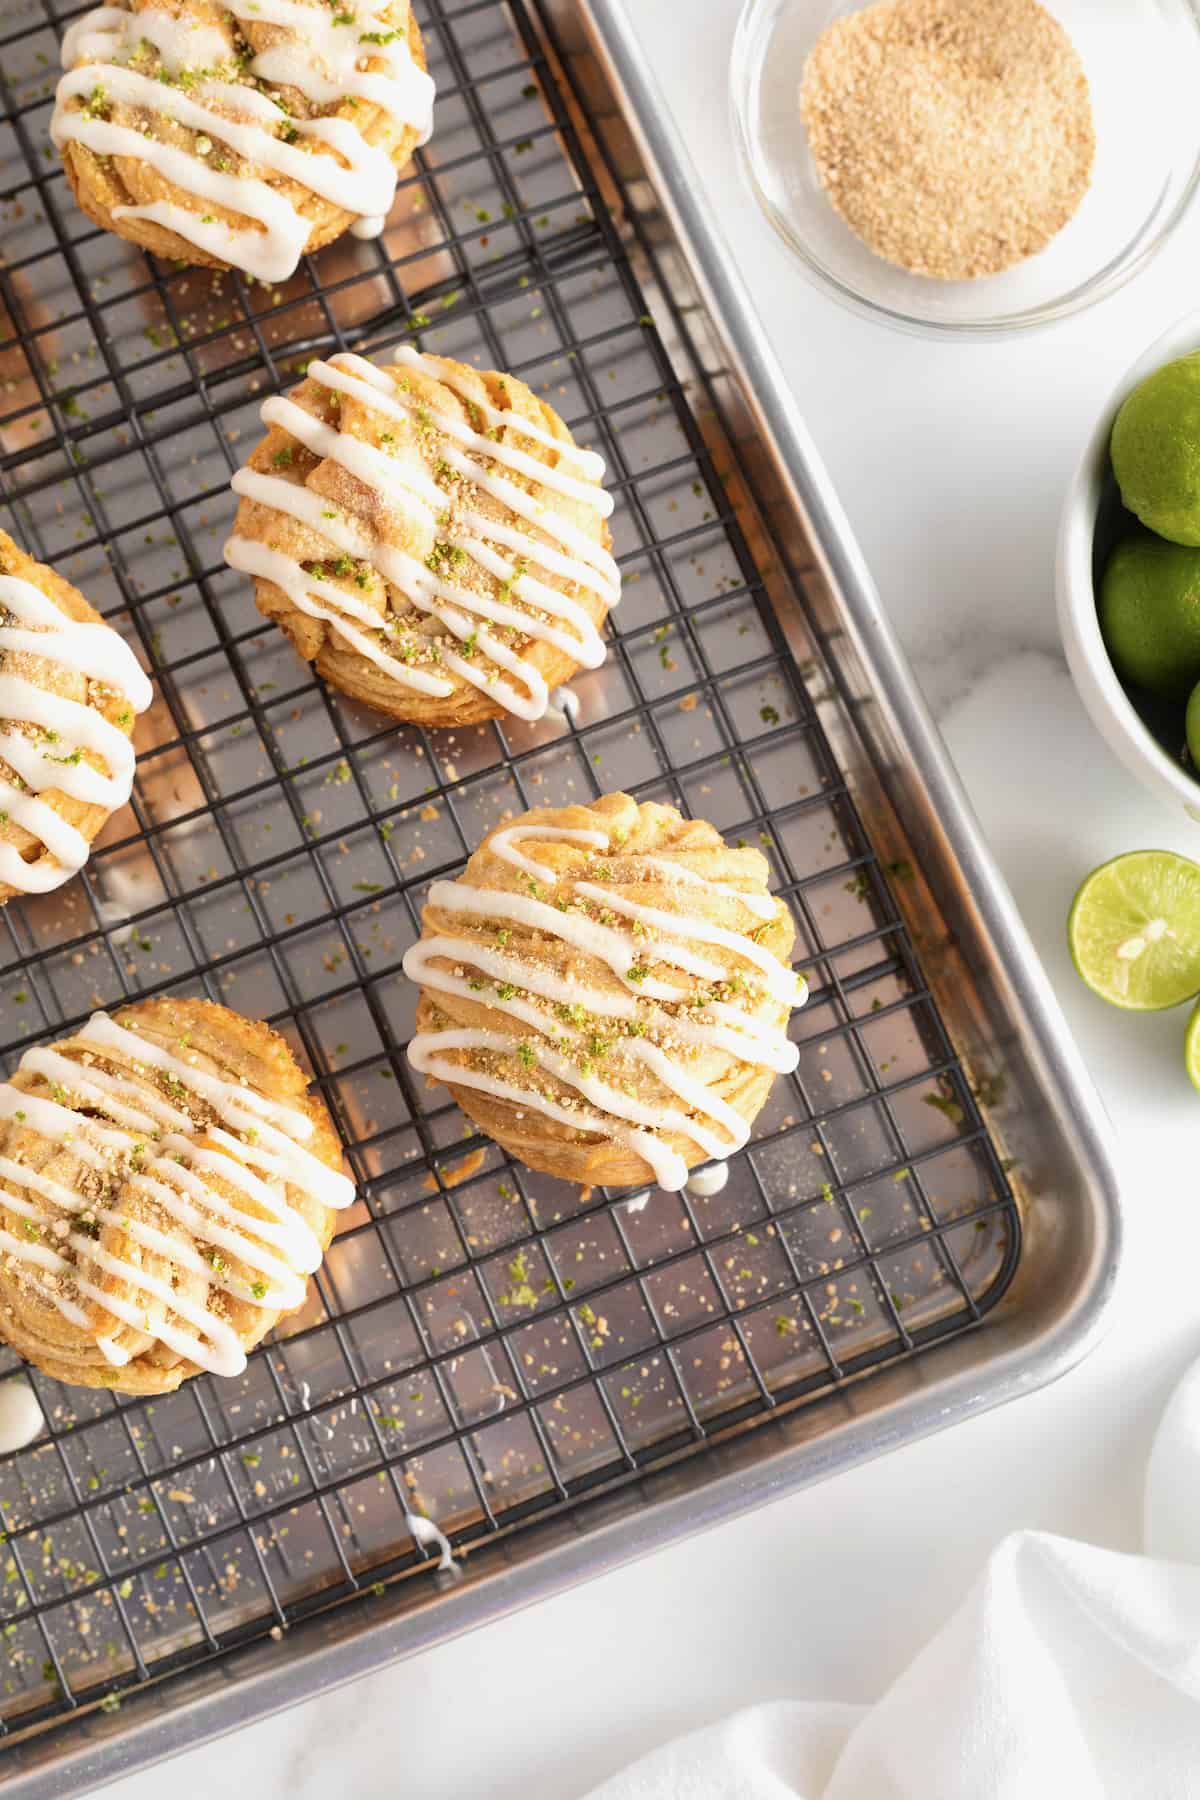 An aluminum baking pan with a wire cooling rack on top holding 4 key lime cruffins.